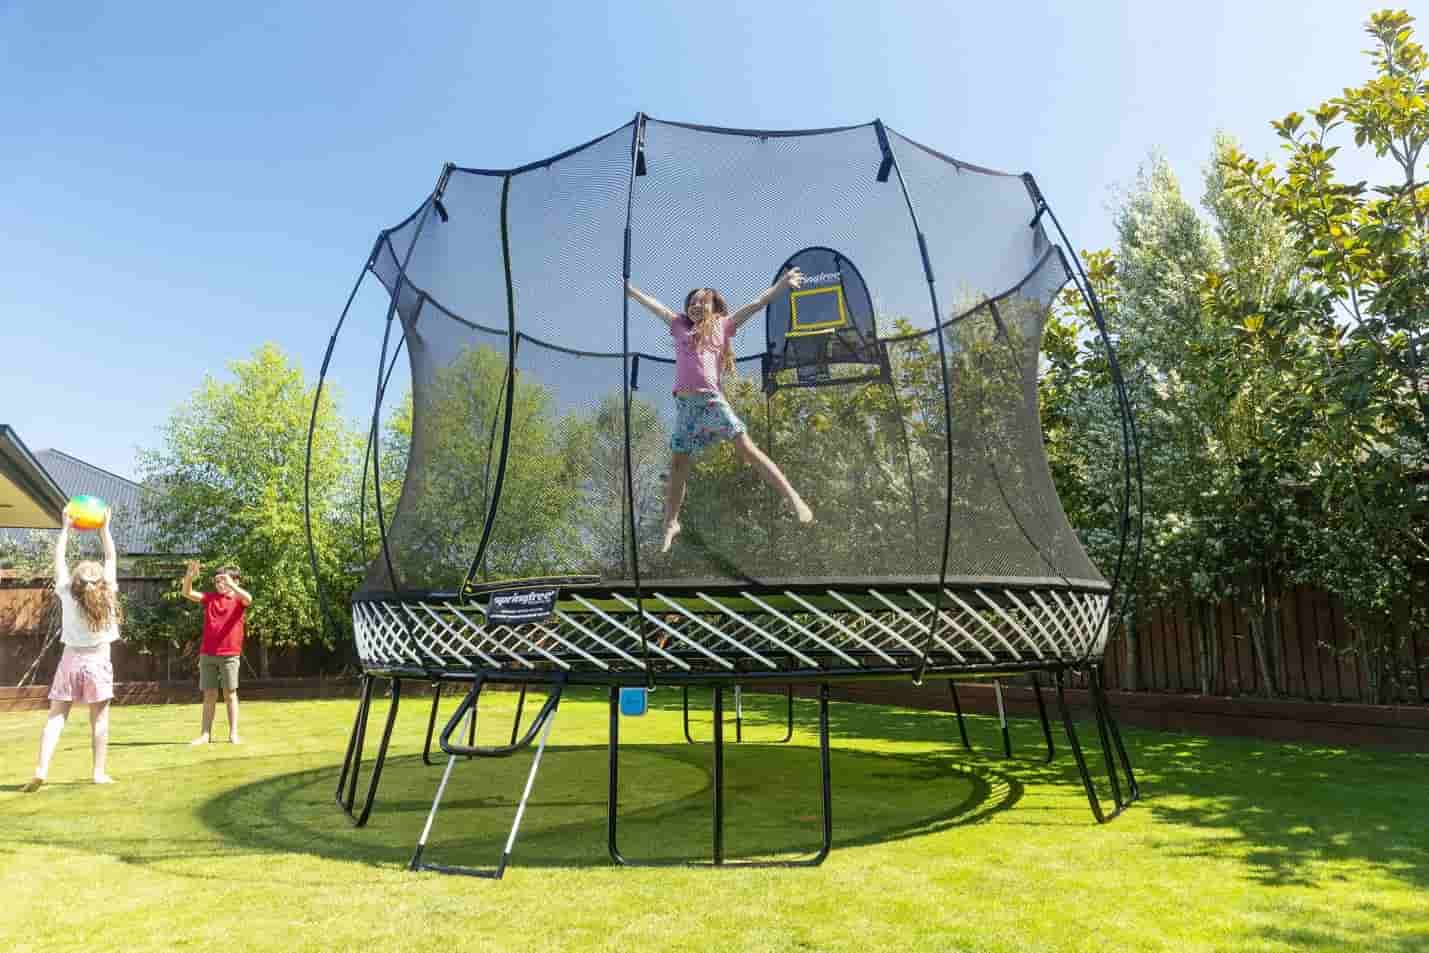 A girl jumping on a Springfree Trampoline while two other kids throw a ball outside of it.